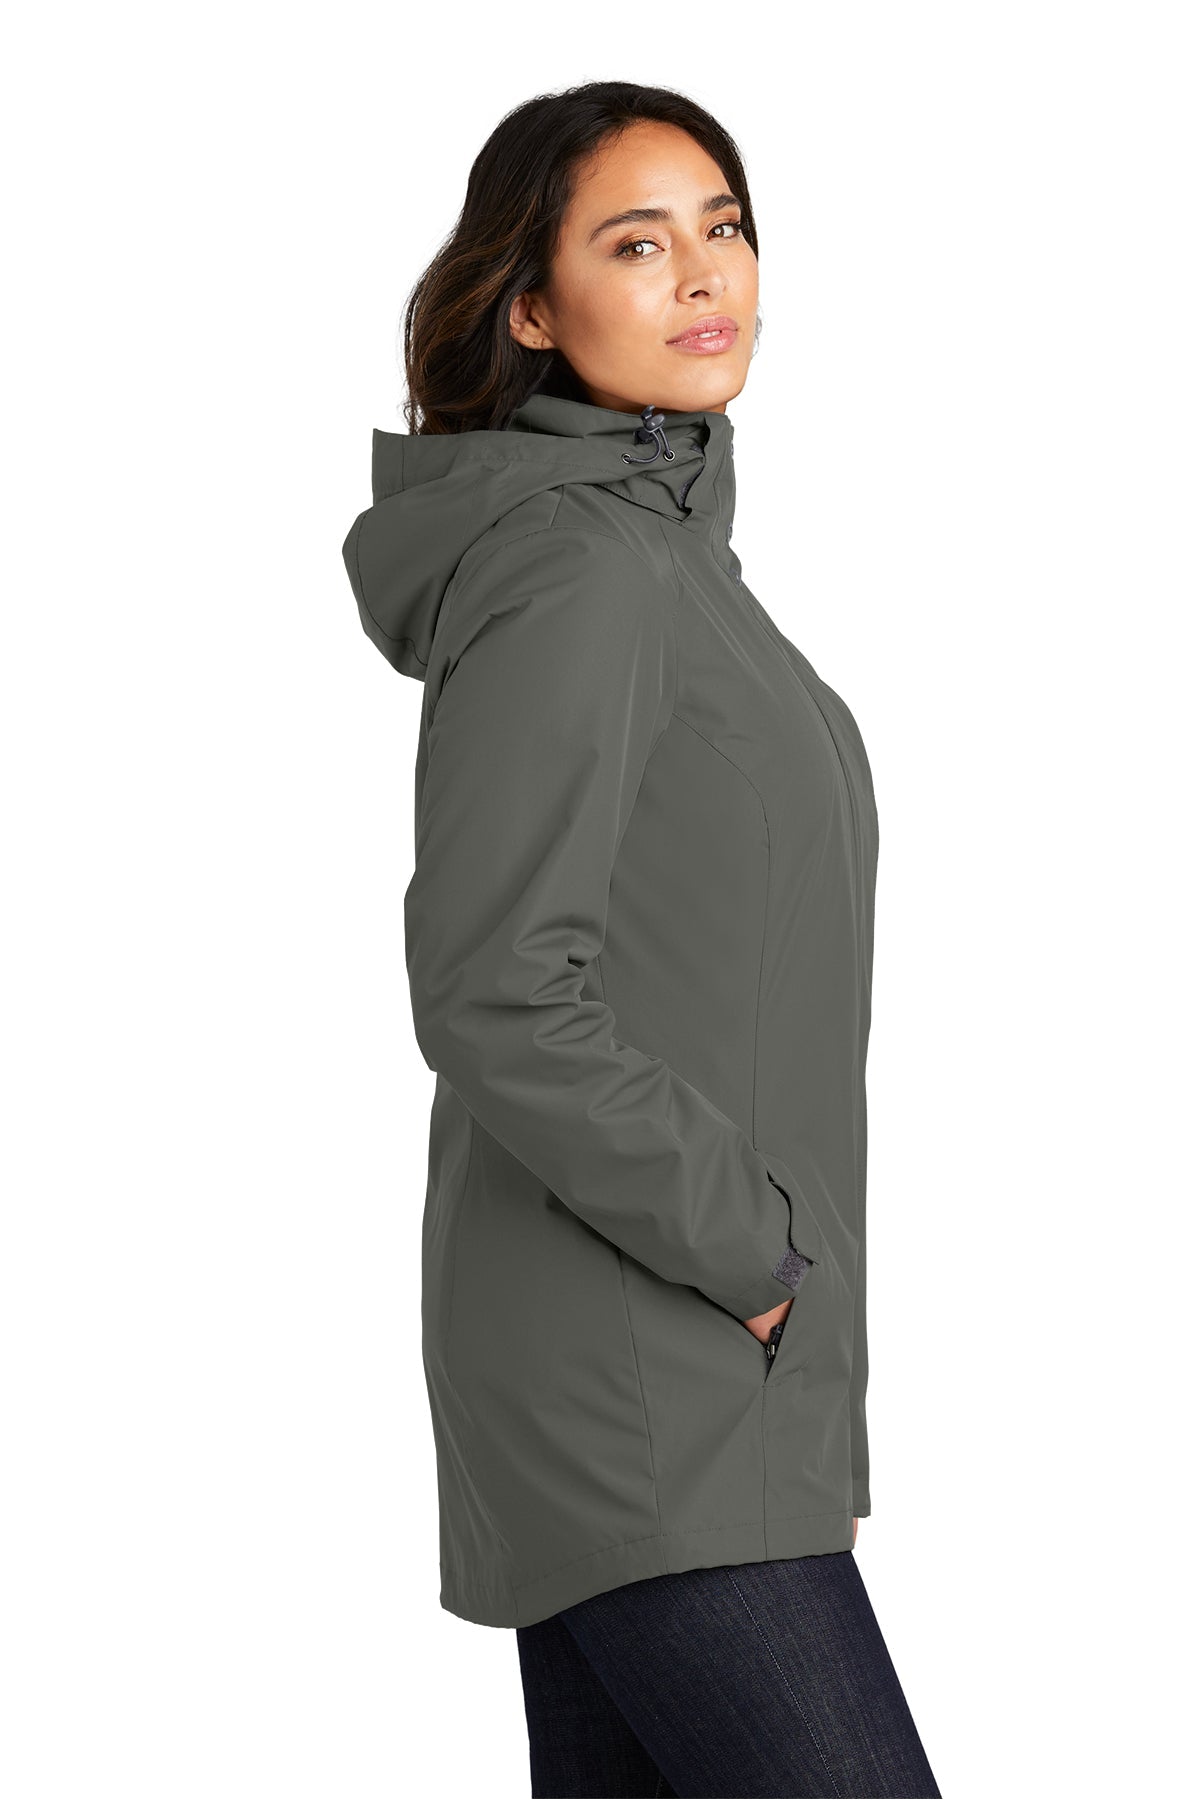 Port Authority Ladies All-Weather 3-in-1 Branded Jackets, Storm Grey